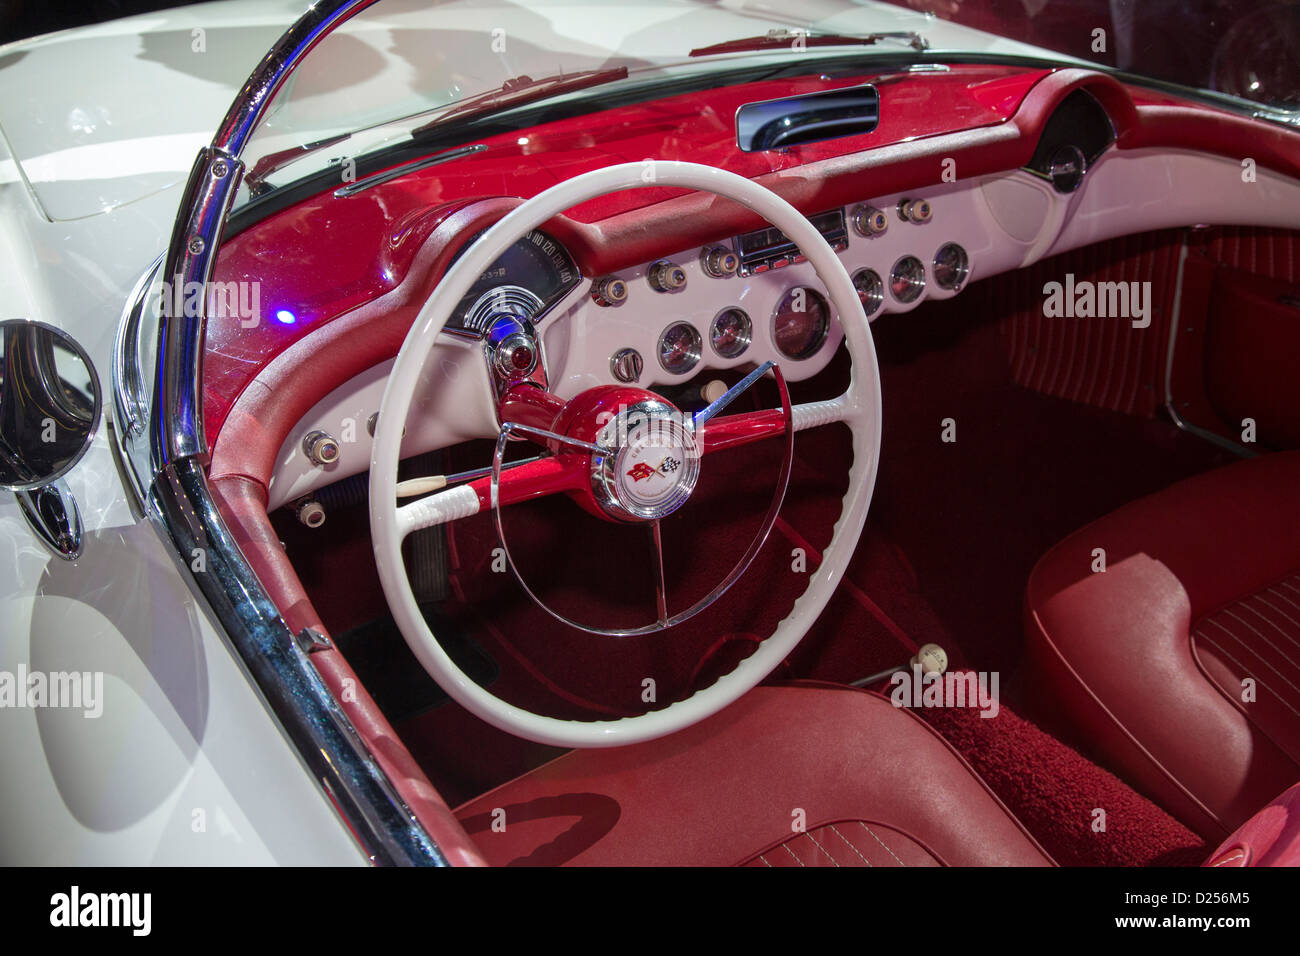 Detroit, Michigan - A 1953 Chevrolet Corvette on display at the North American International Auto Show. Stock Photo